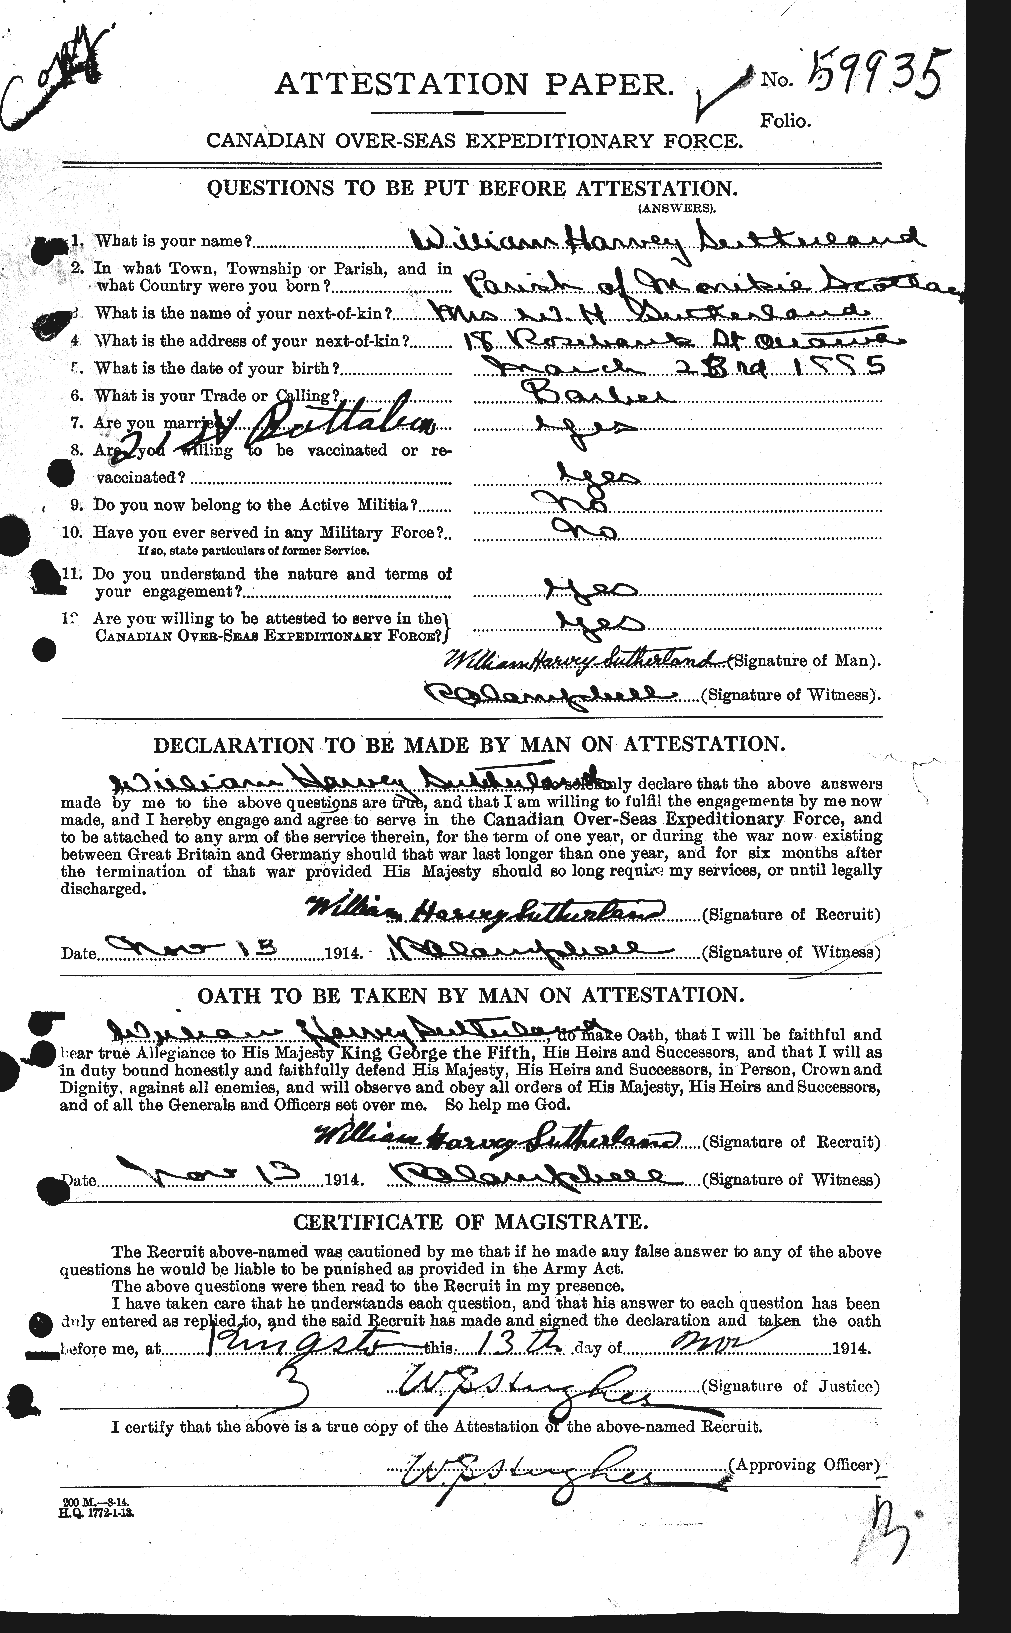 Personnel Records of the First World War - CEF 126425a